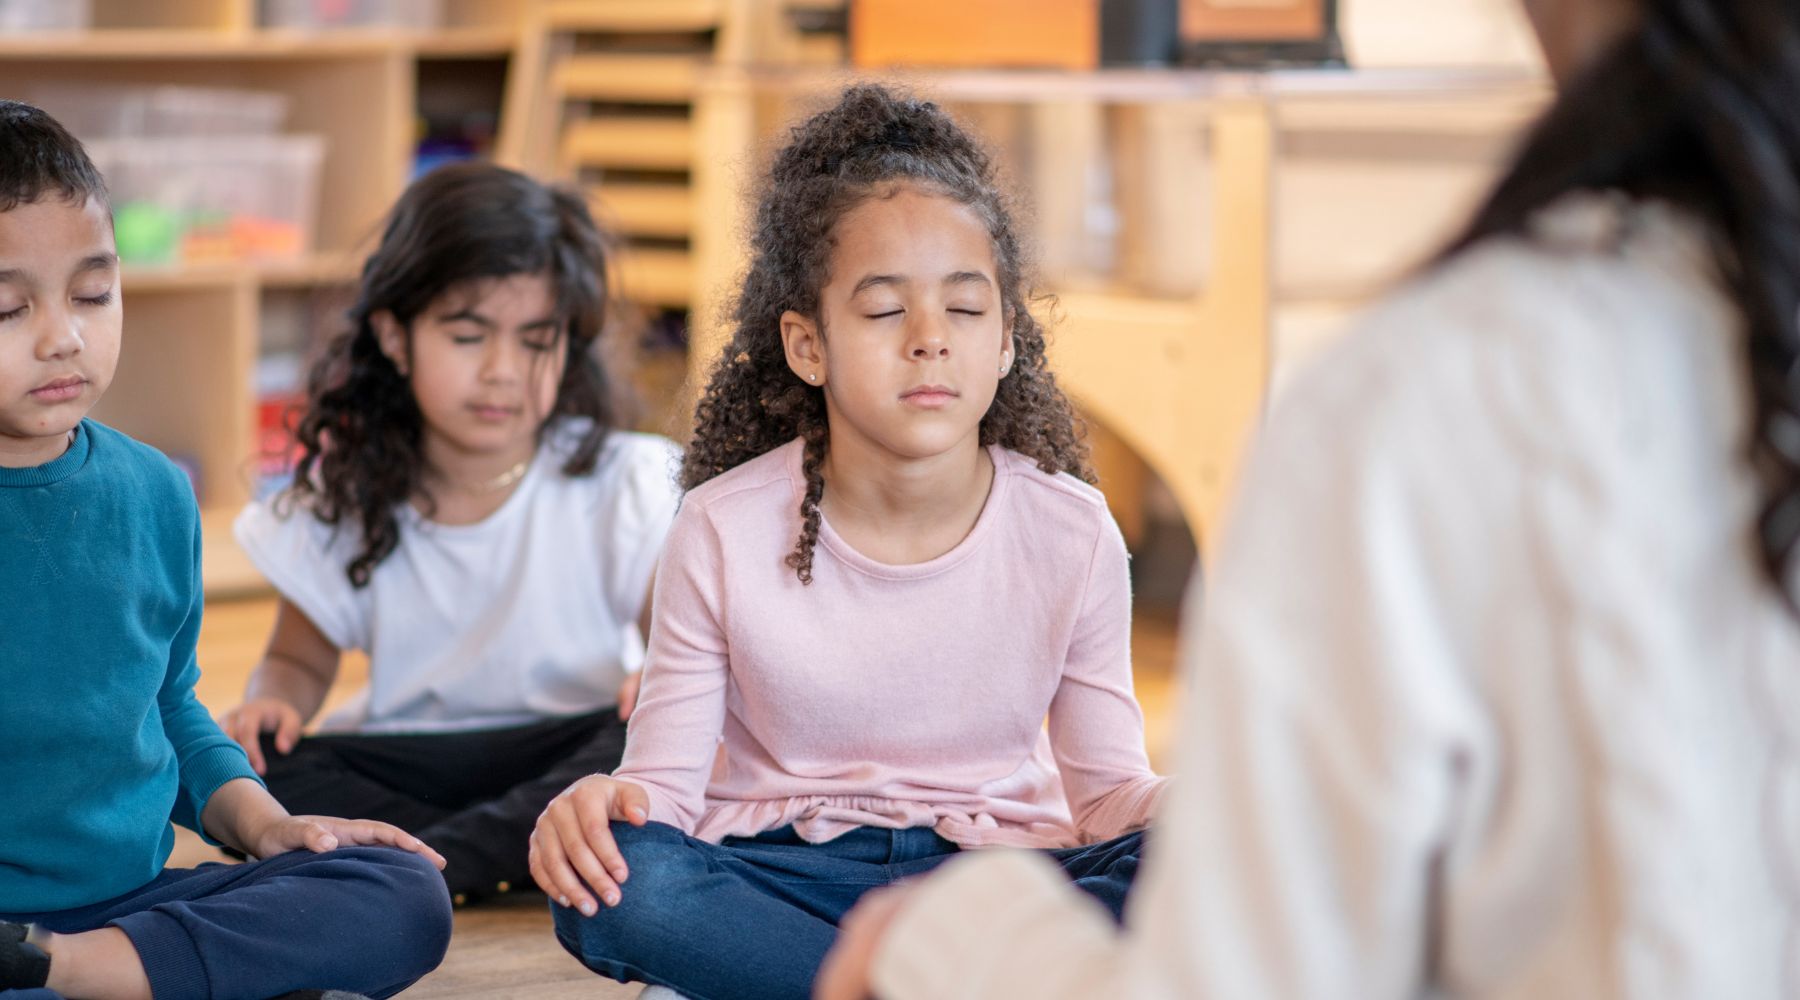 A Guided Meditation for Kids - Feed Your Spirit